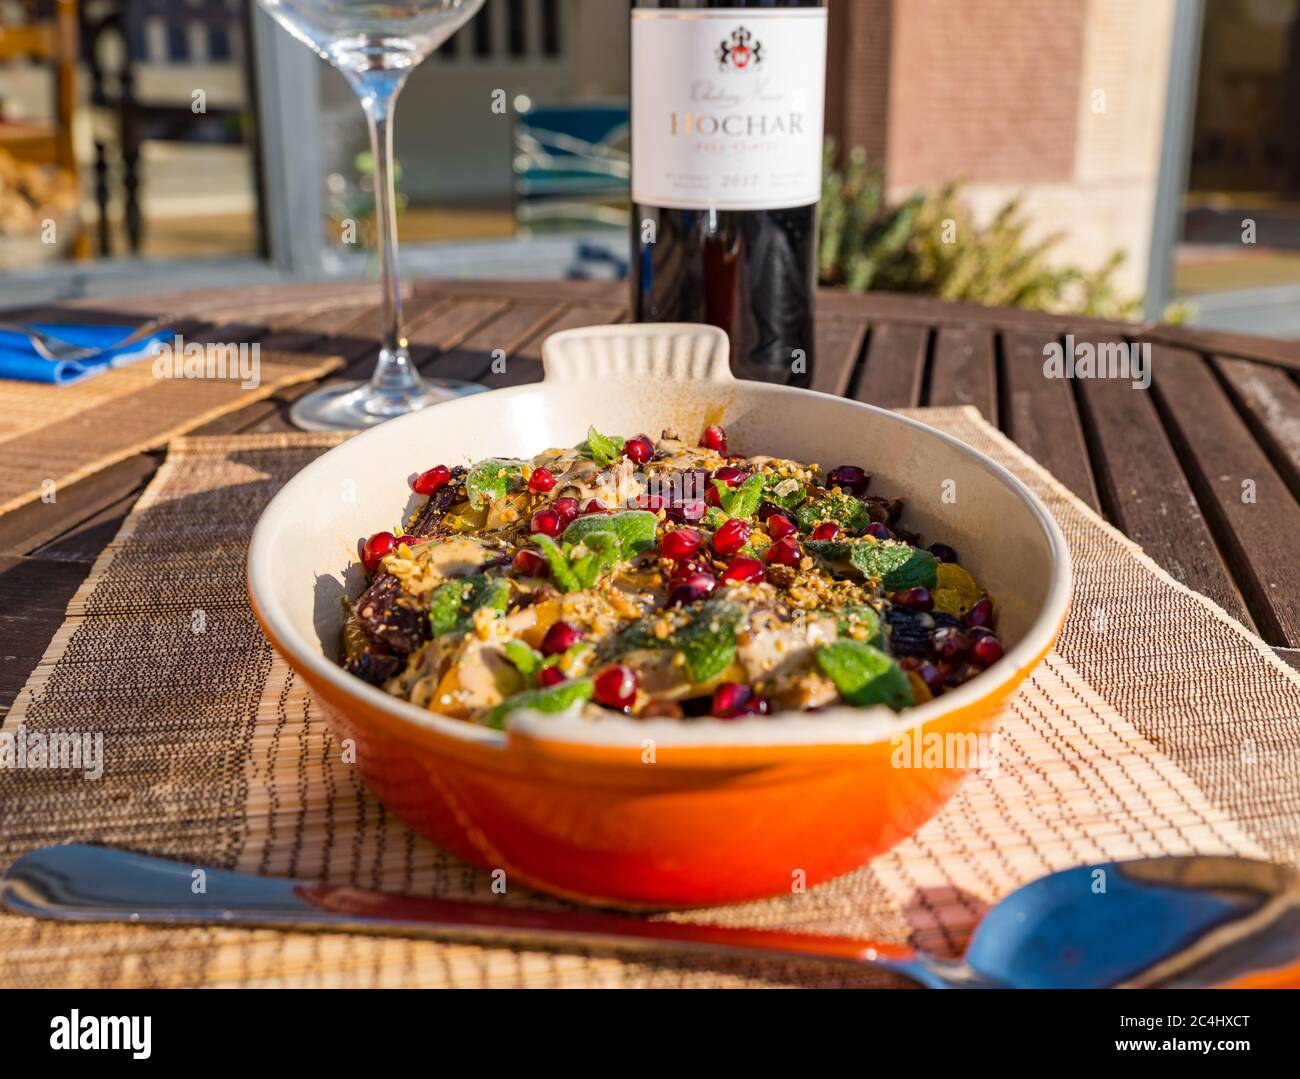 Middle Eastern roasted vegetable dish with butternut squash, pomegranate seeds; Lebanese red wine Chateau Musar Hochar from Bekaa Valley, UK Stock Photo